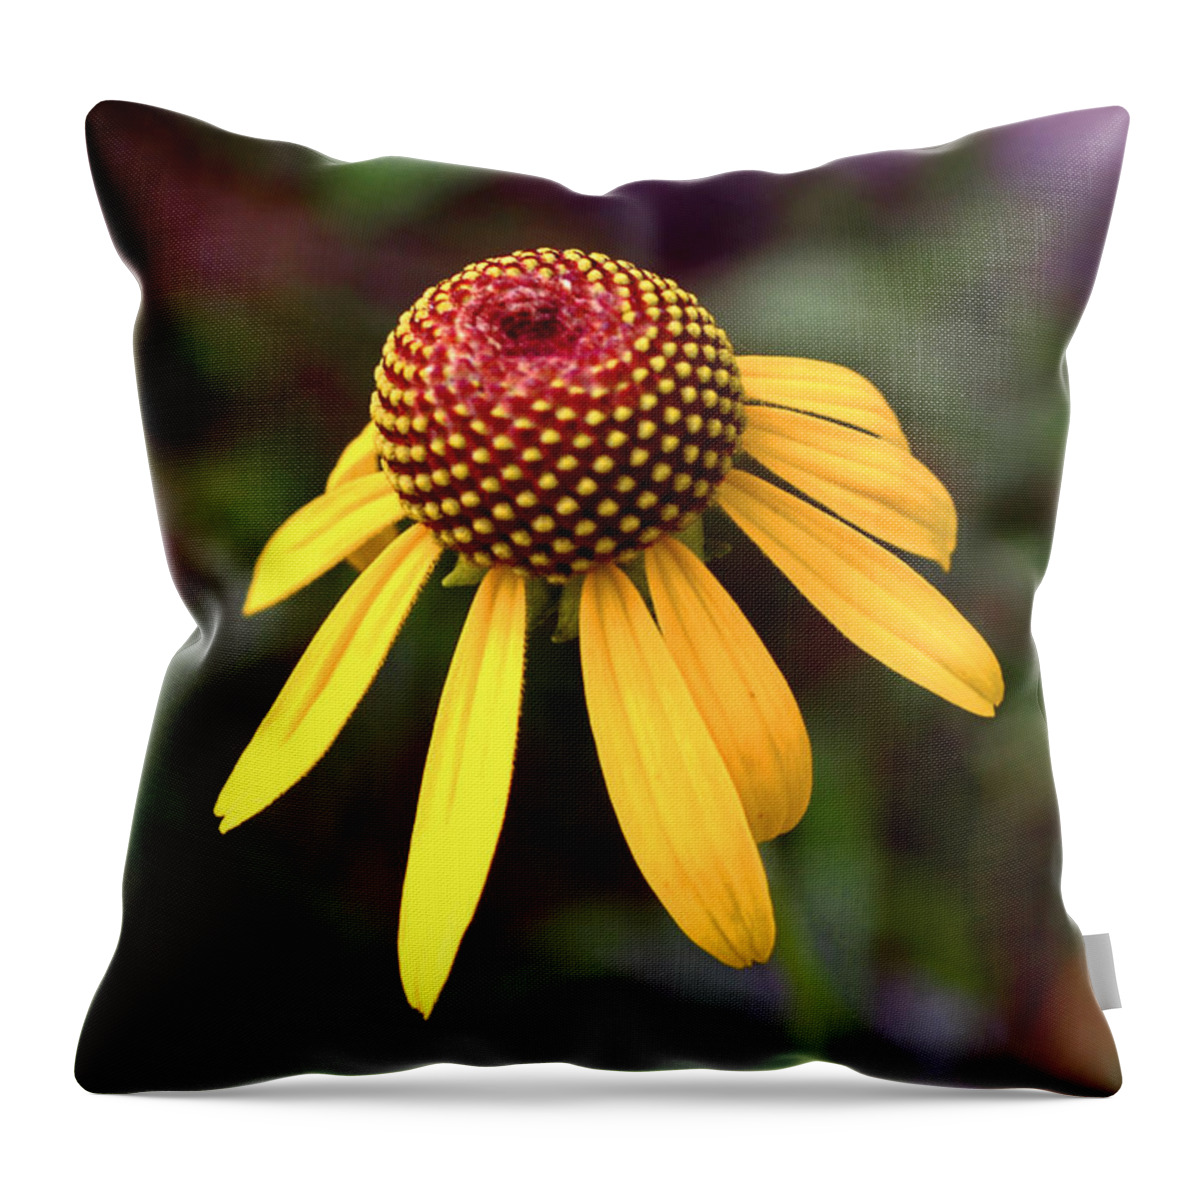 Daisy Throw Pillow featuring the photograph Symmetry Of Nature 015 by George Bostian